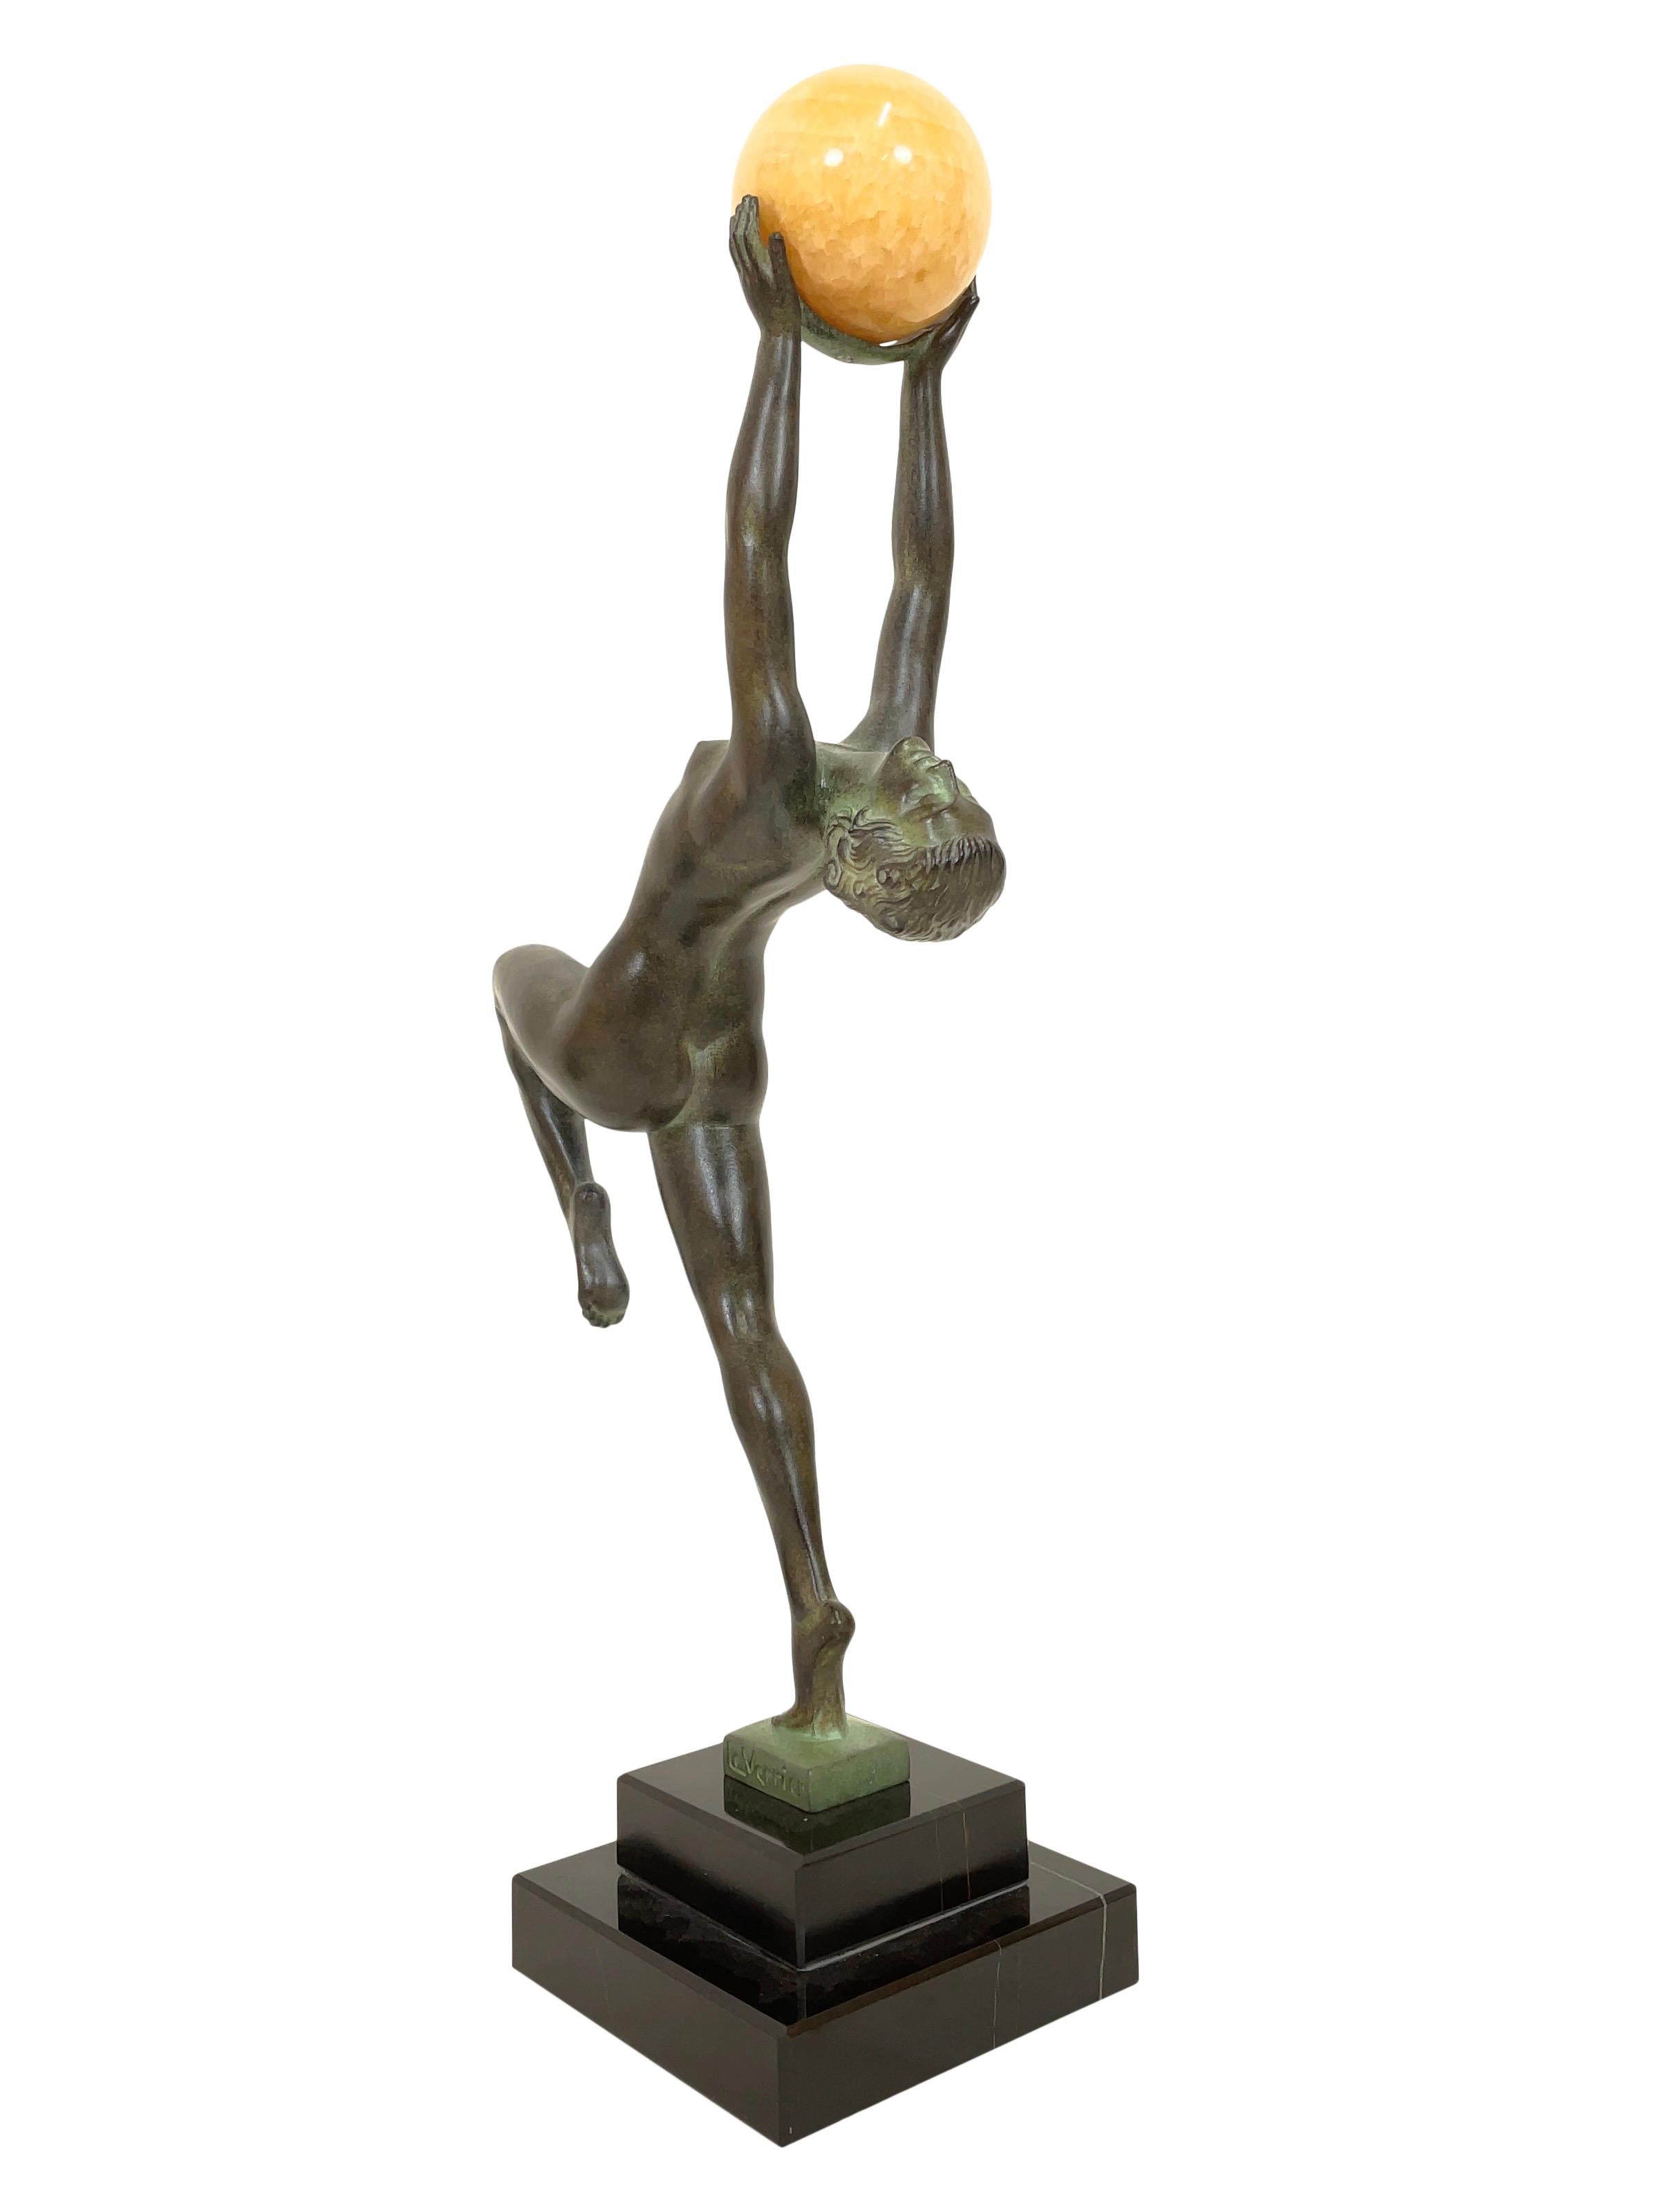 Jeu Sculpture in Spelter with an Onyx Ball from Max Le Verrier in Art Deco Style 1